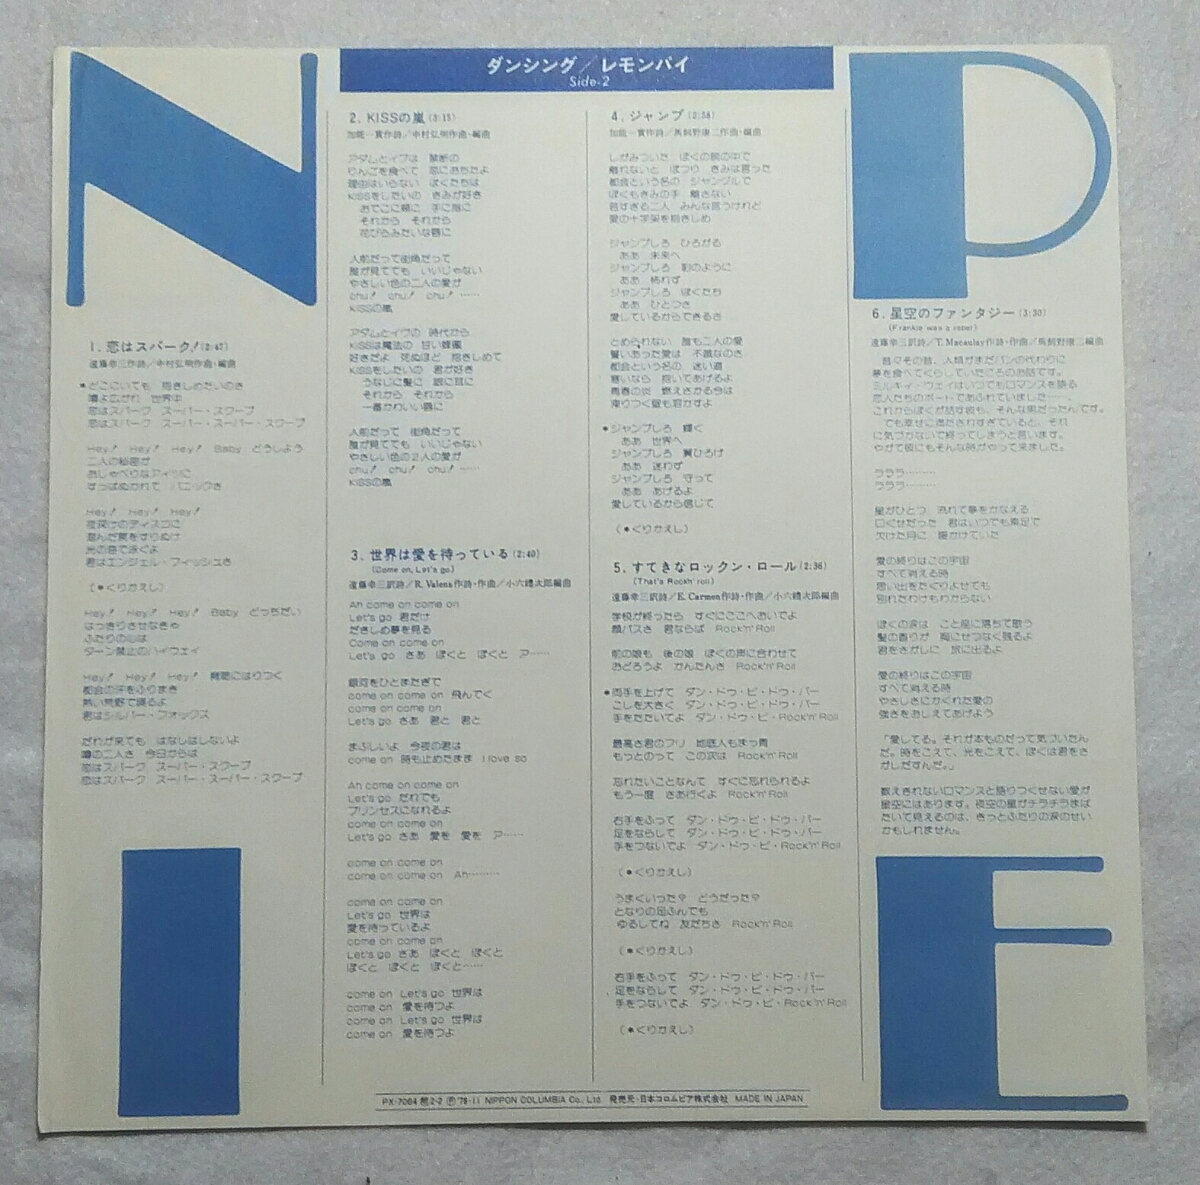 1LP lemon pie / Dan singPX-7064 Mr. post man other . cover great number compilation translation equipped 